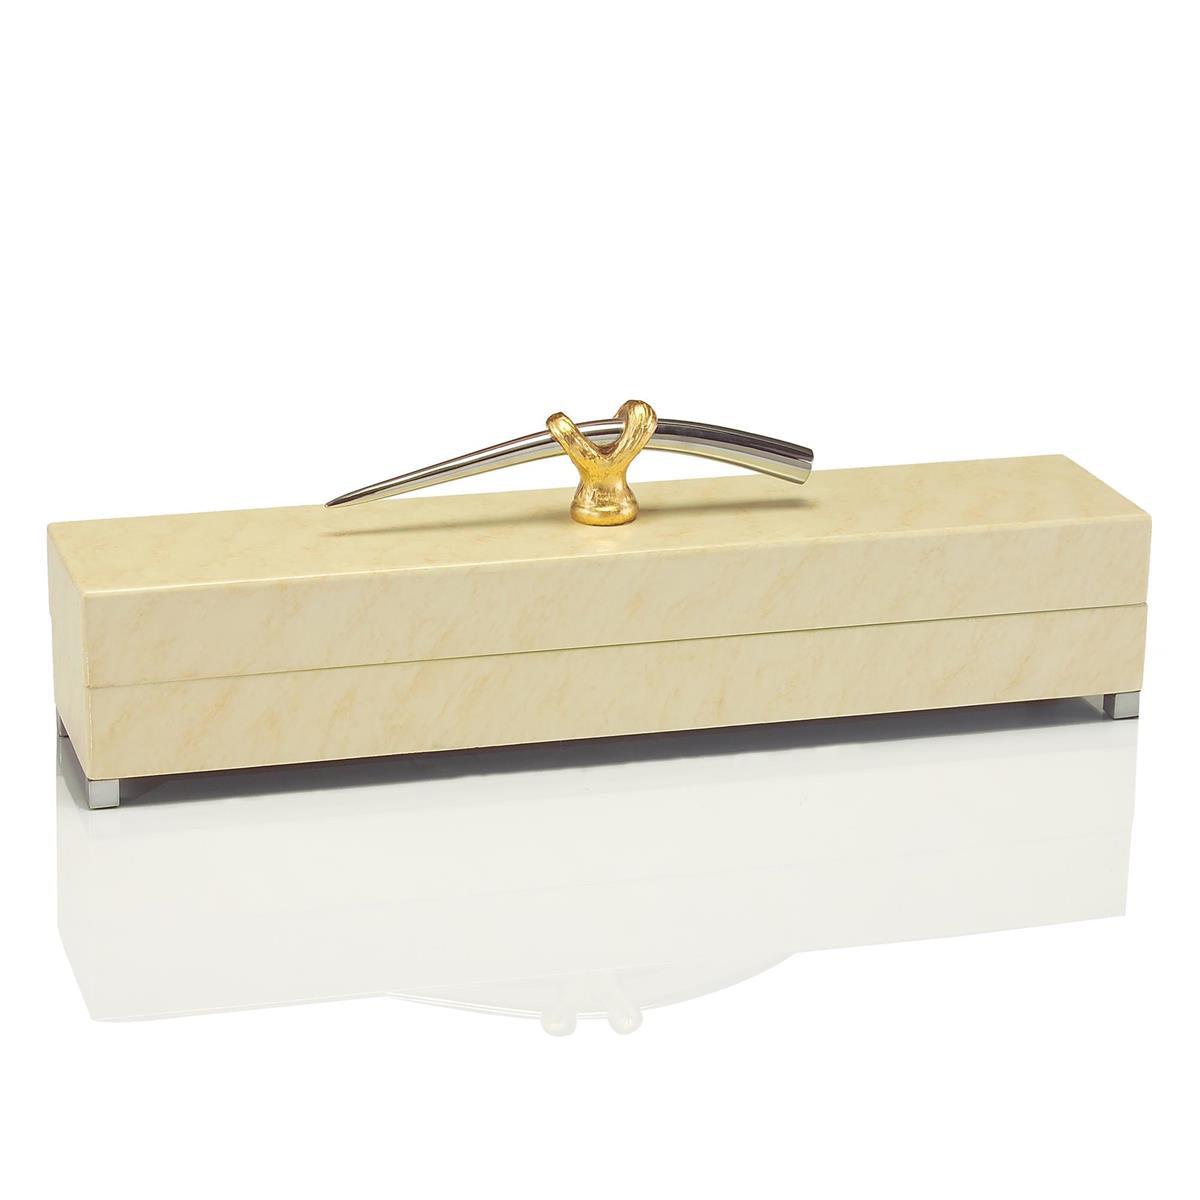 Cream Box with Gold and Nickel Handle-John Richard-Boxes-Artistic Elements